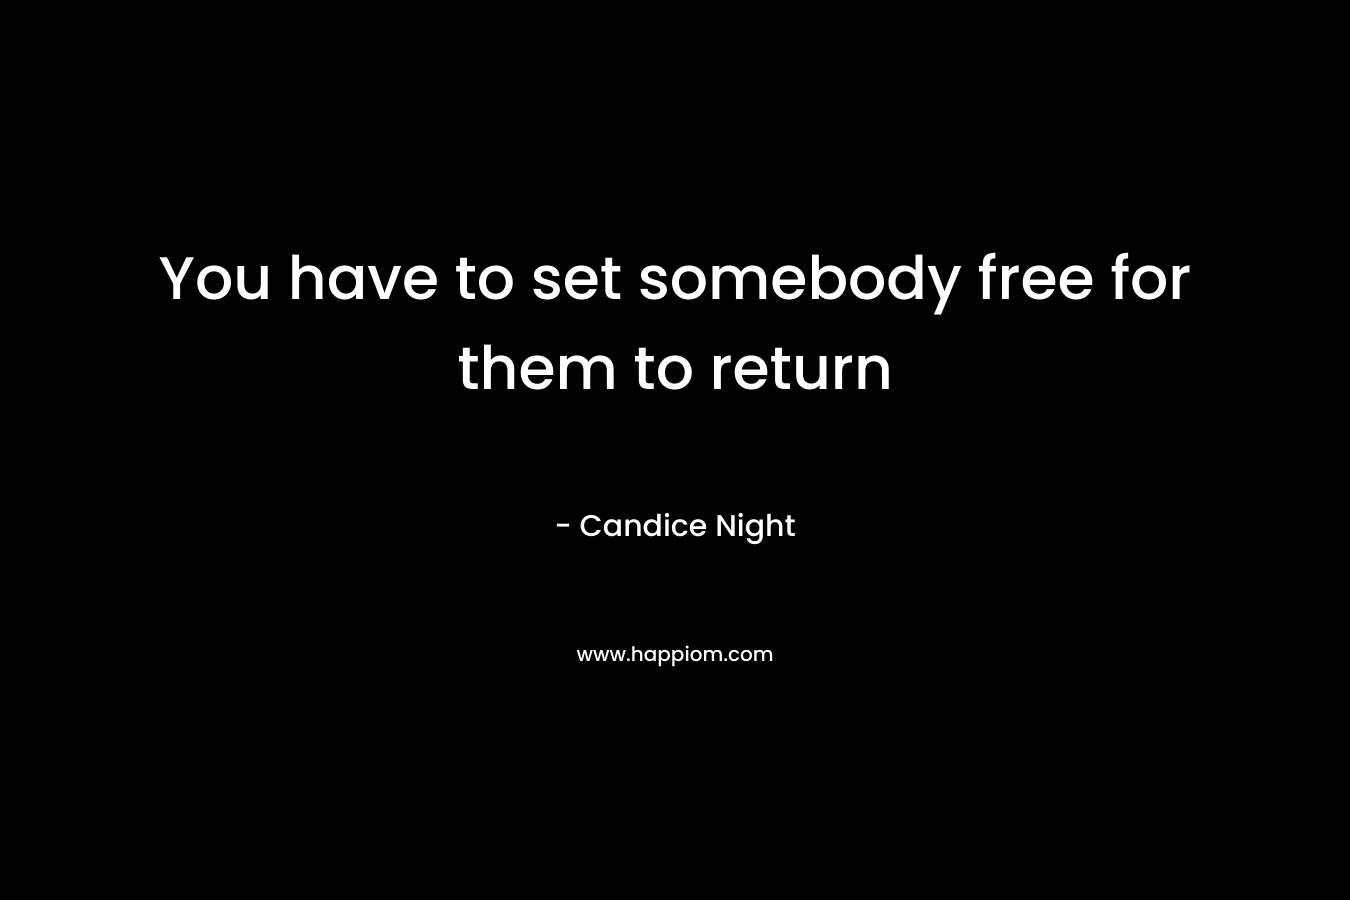 You have to set somebody free for them to return – Candice Night